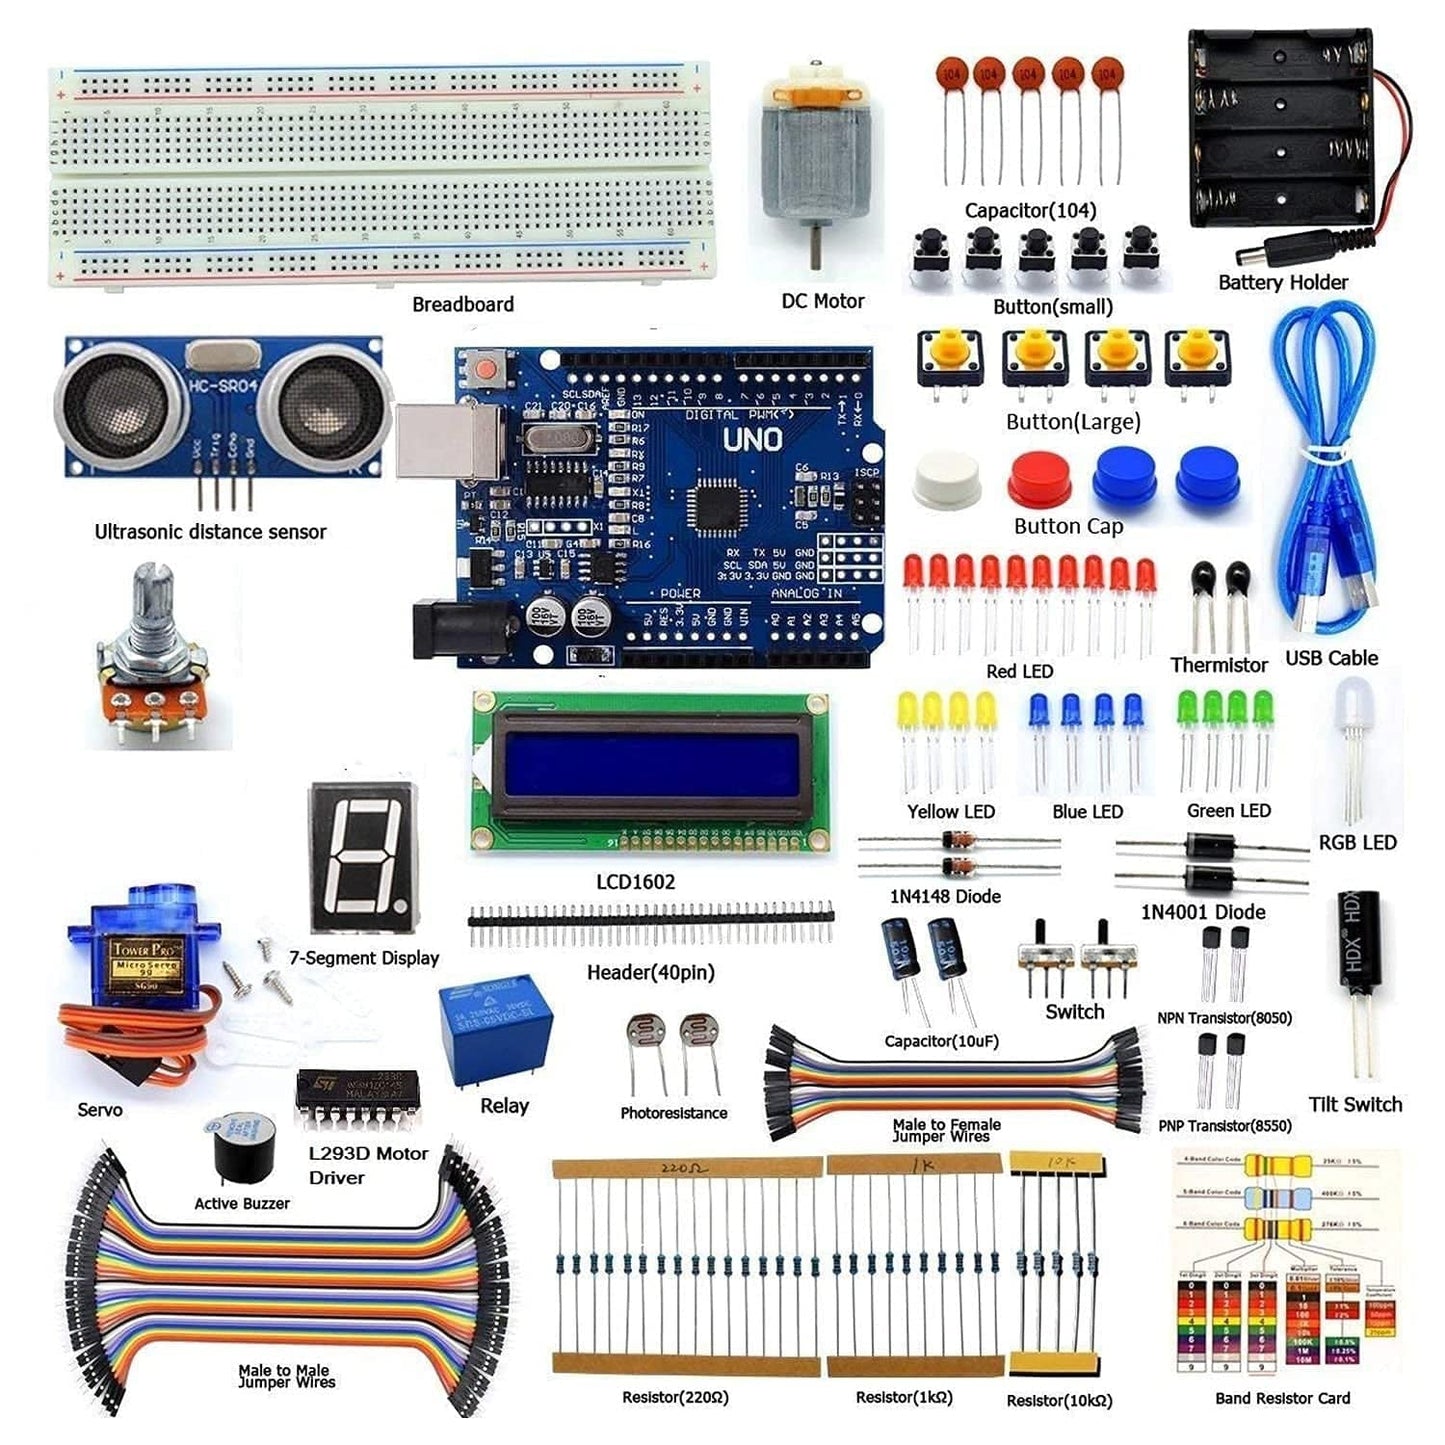 DIY Ultrasonic Distance Sensor Starter Kit For Compatible with Smd UNO IDE Projects - B0B8DF3D8W - REES52